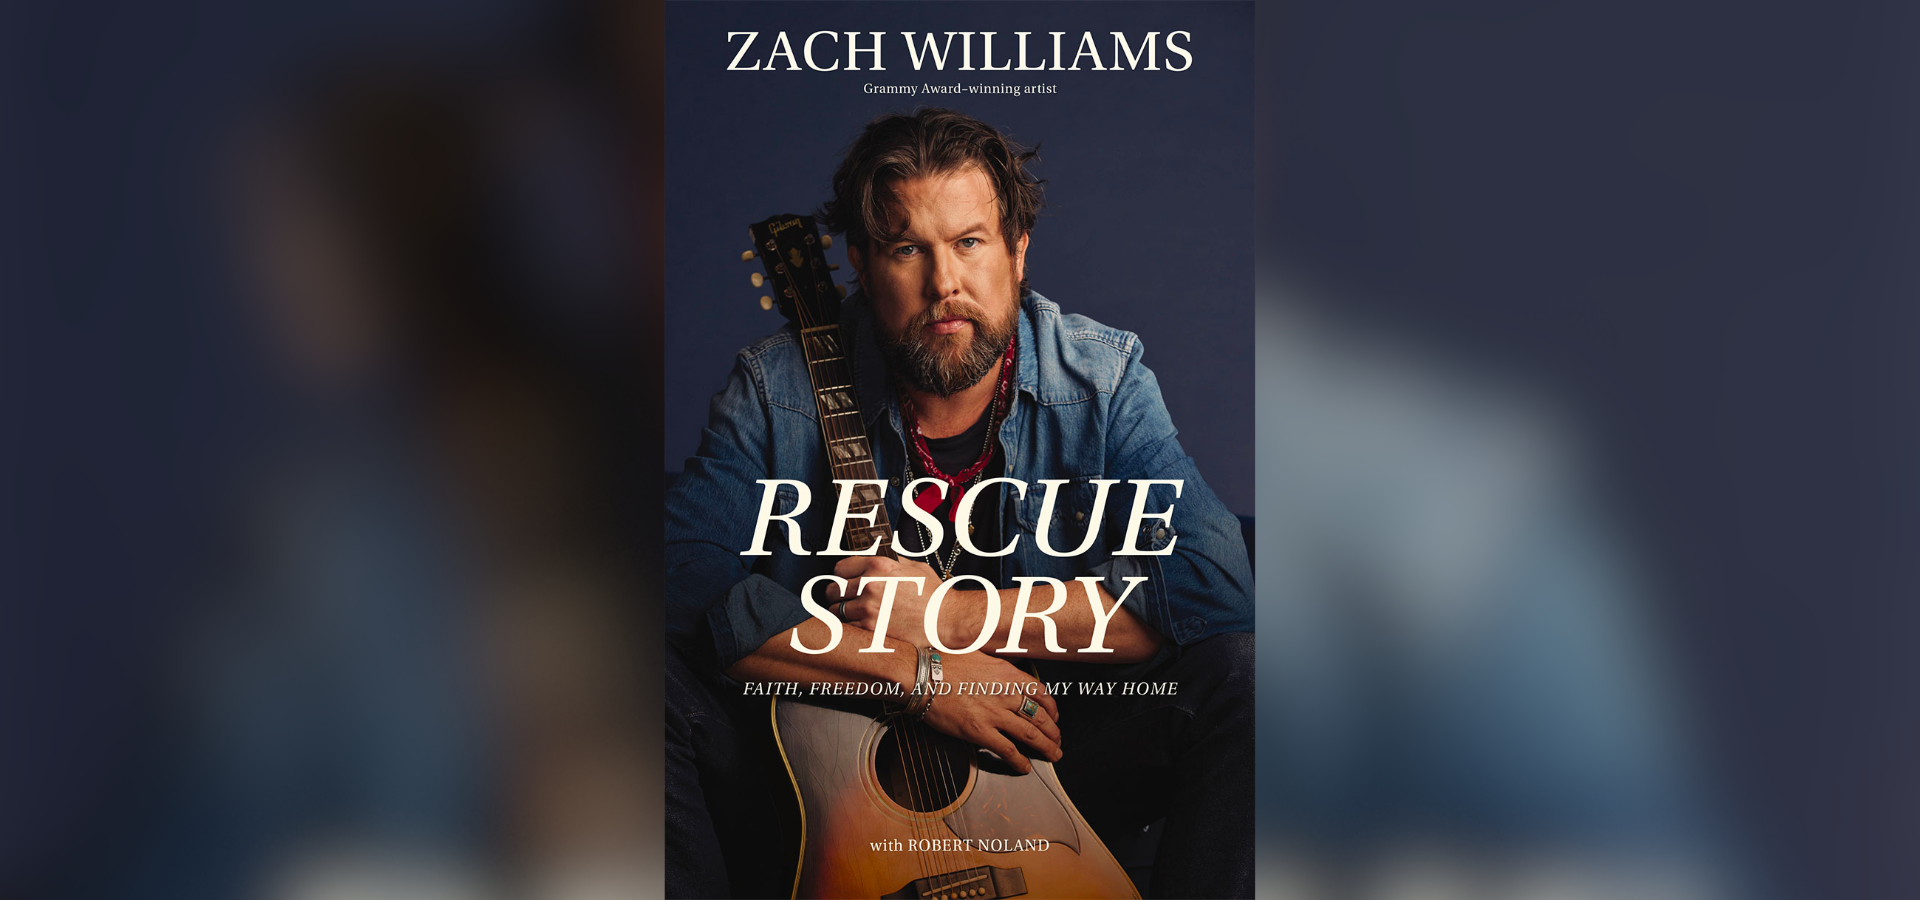 Zach Williams Releases New Book, Rescue Story